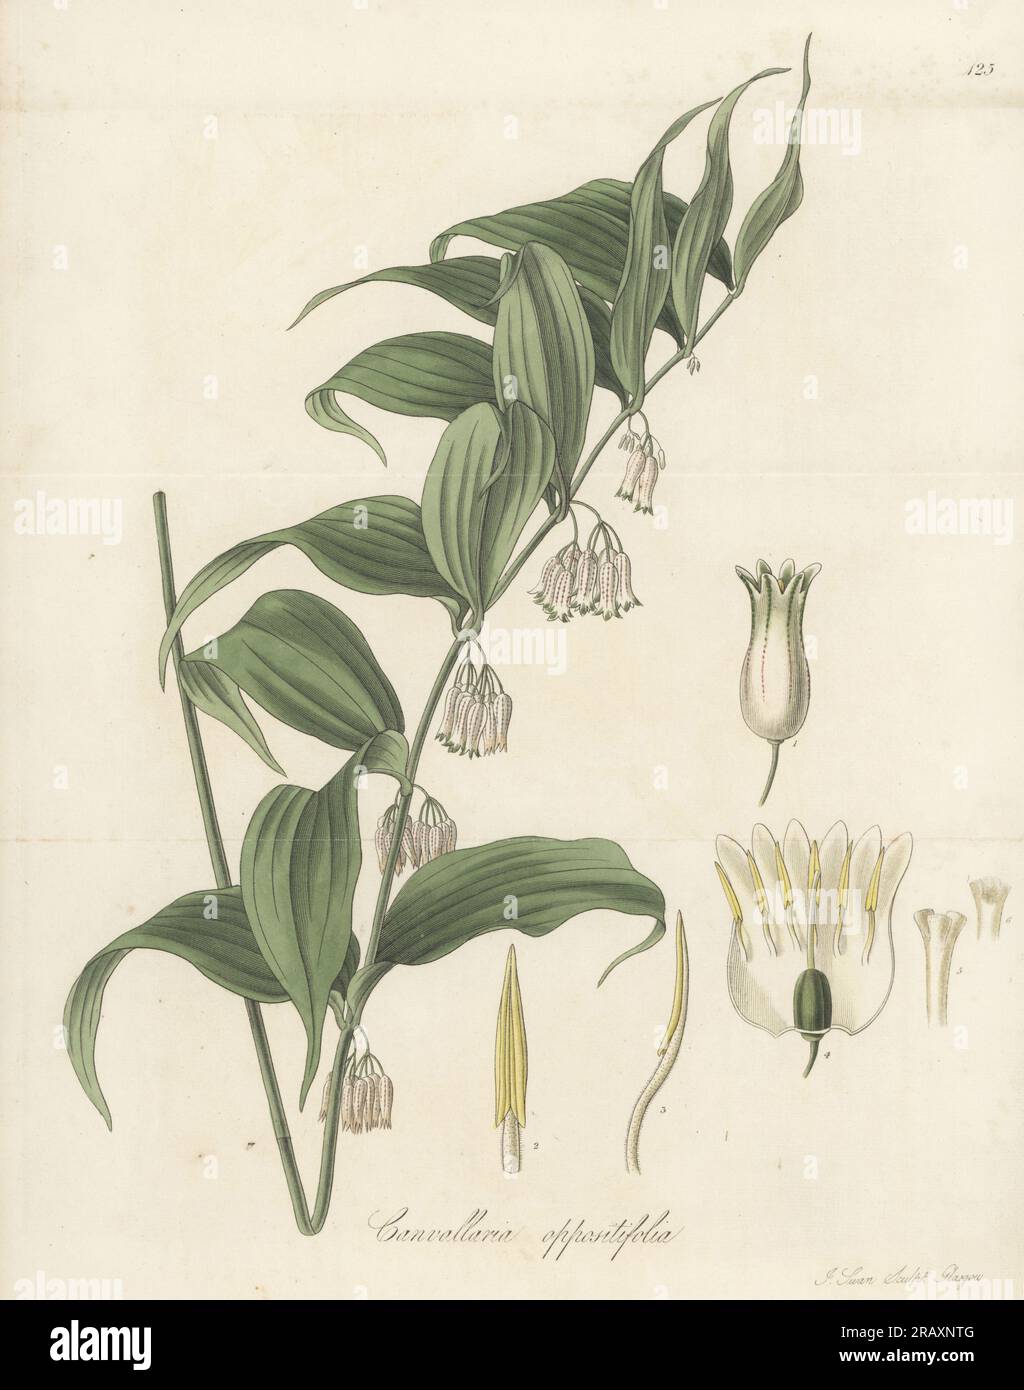 Solomon's Seal, Polygonatum oppositifolium. Sent from Nepal by Dr. Nathaniel Wallich to nurseryman George Loddiges in 1819. Opposite-leaved Solomon's Seal, Convallaria oppositifolia. Handcoloured copperplate engraving by Joseph Swan after a botanical illustration by William Jackson Hooker from his Exotic Flora, William Blackwood, Edinburgh, 1823-27. Stock Photo